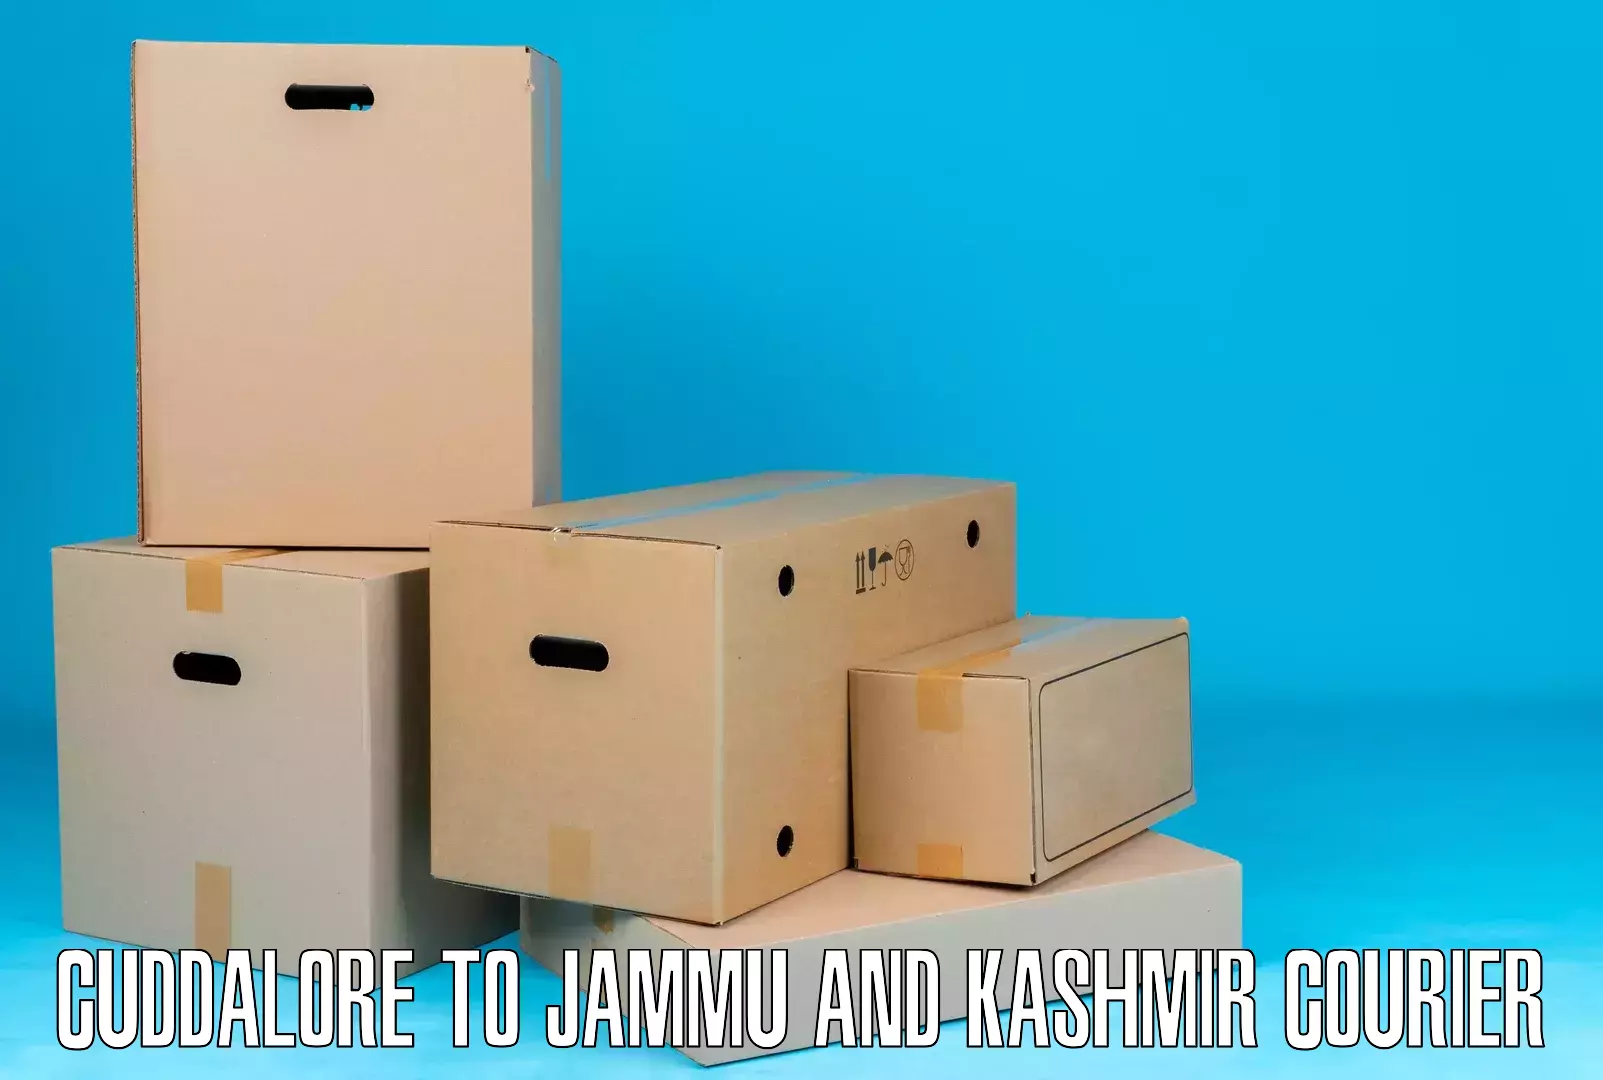 Domestic courier Cuddalore to Jammu and Kashmir